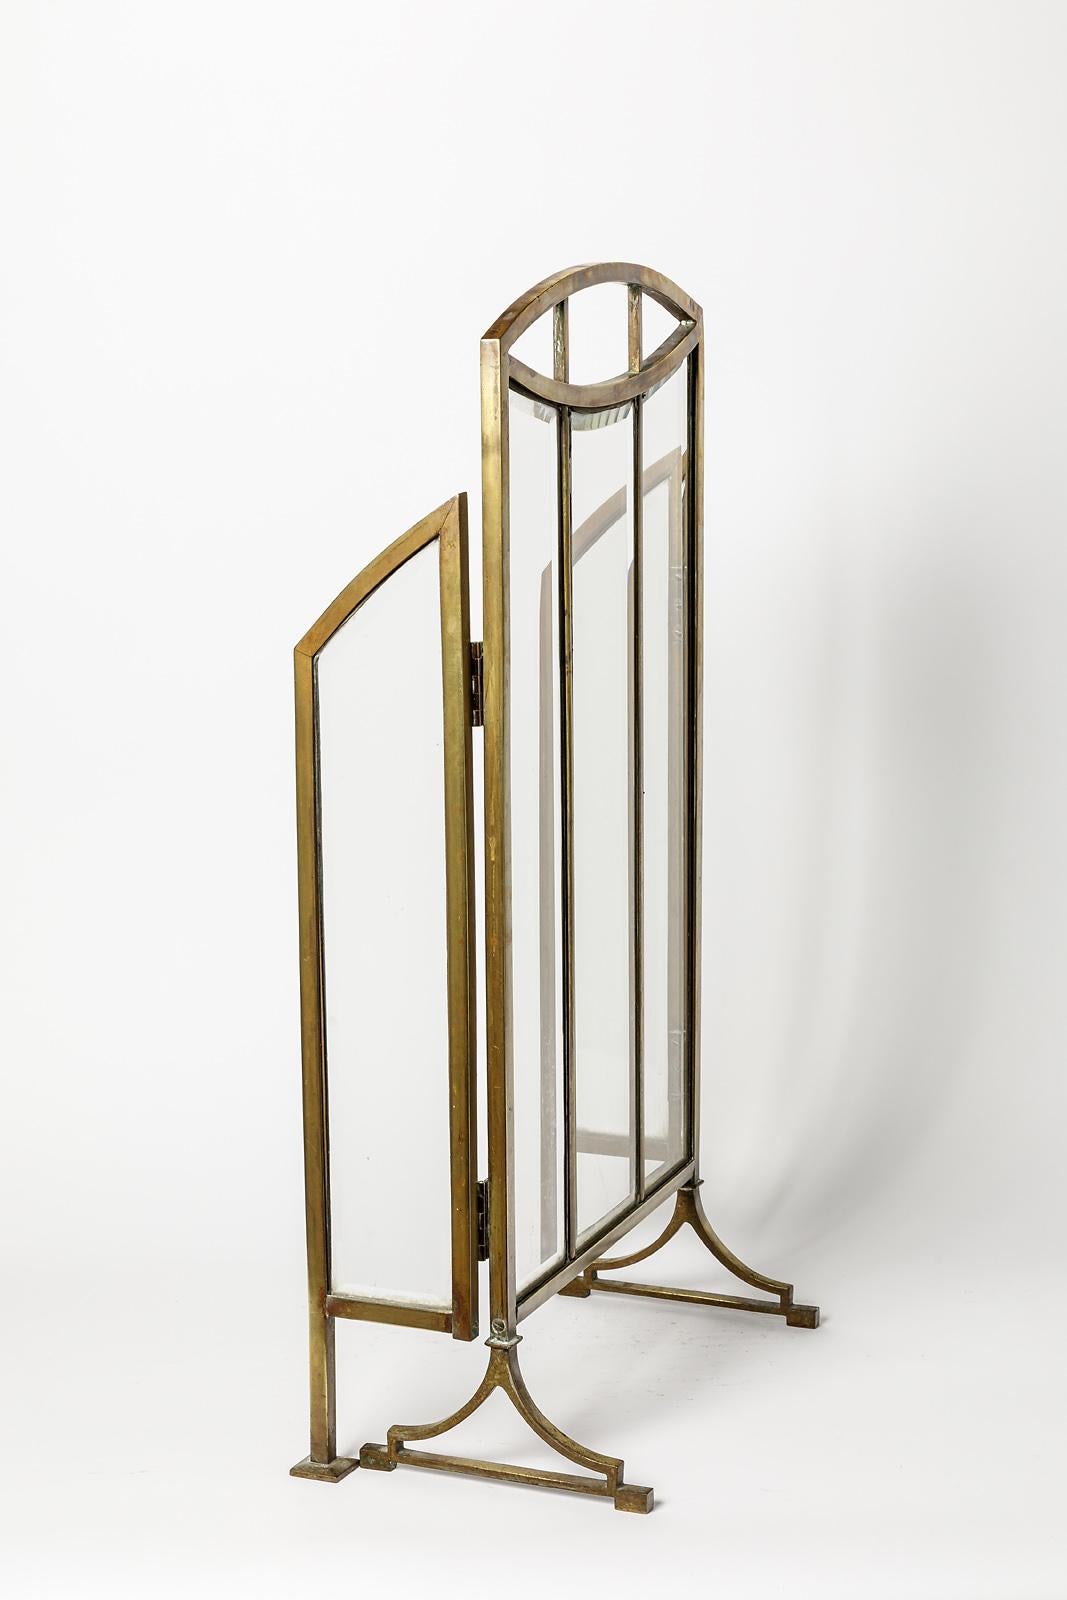 20th Century 1900 French Art Deco Golden Brass and Glass Fire Screen for Fireplace